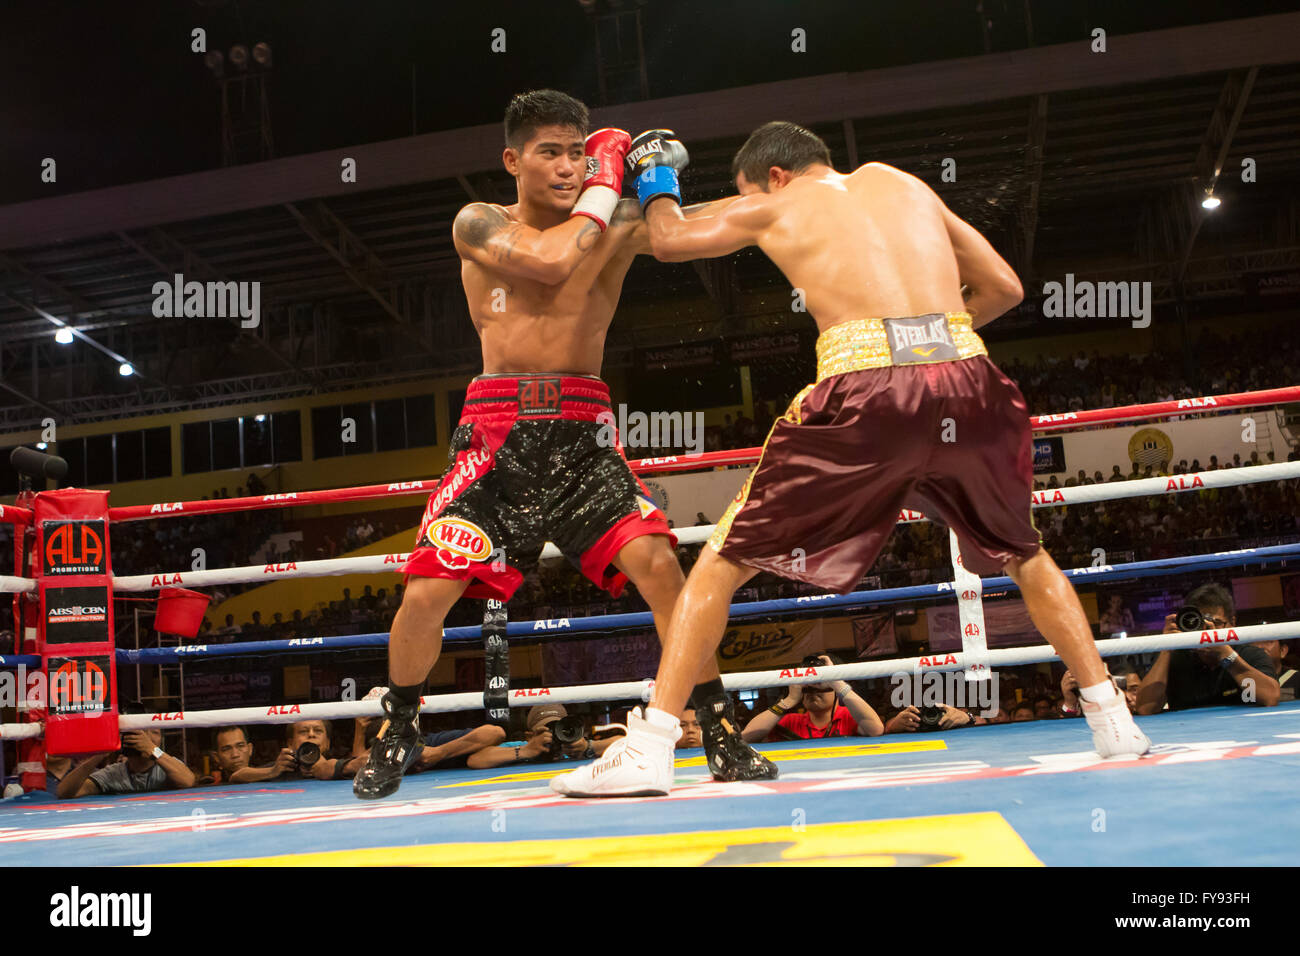 23/4/2016 Cebu City Sports Complex, Cebu City, Philippines.On the same fight card as Donaire vs Bedak, up and coming Filipino boxing prospect Mark ‘Magnifico’ Magsayo (20 yrs W14 L0 D0) fought Chris ‘The Hitman’ Avalos (26yrs W26 L5 D0) for the vacant WBO International Featherweight Championship.The bout ending in round  six after an onslaught from Magsayo forcing the corner of Avalos to throw in the towel just at that moment the referee stopped the fight. Stock Photo